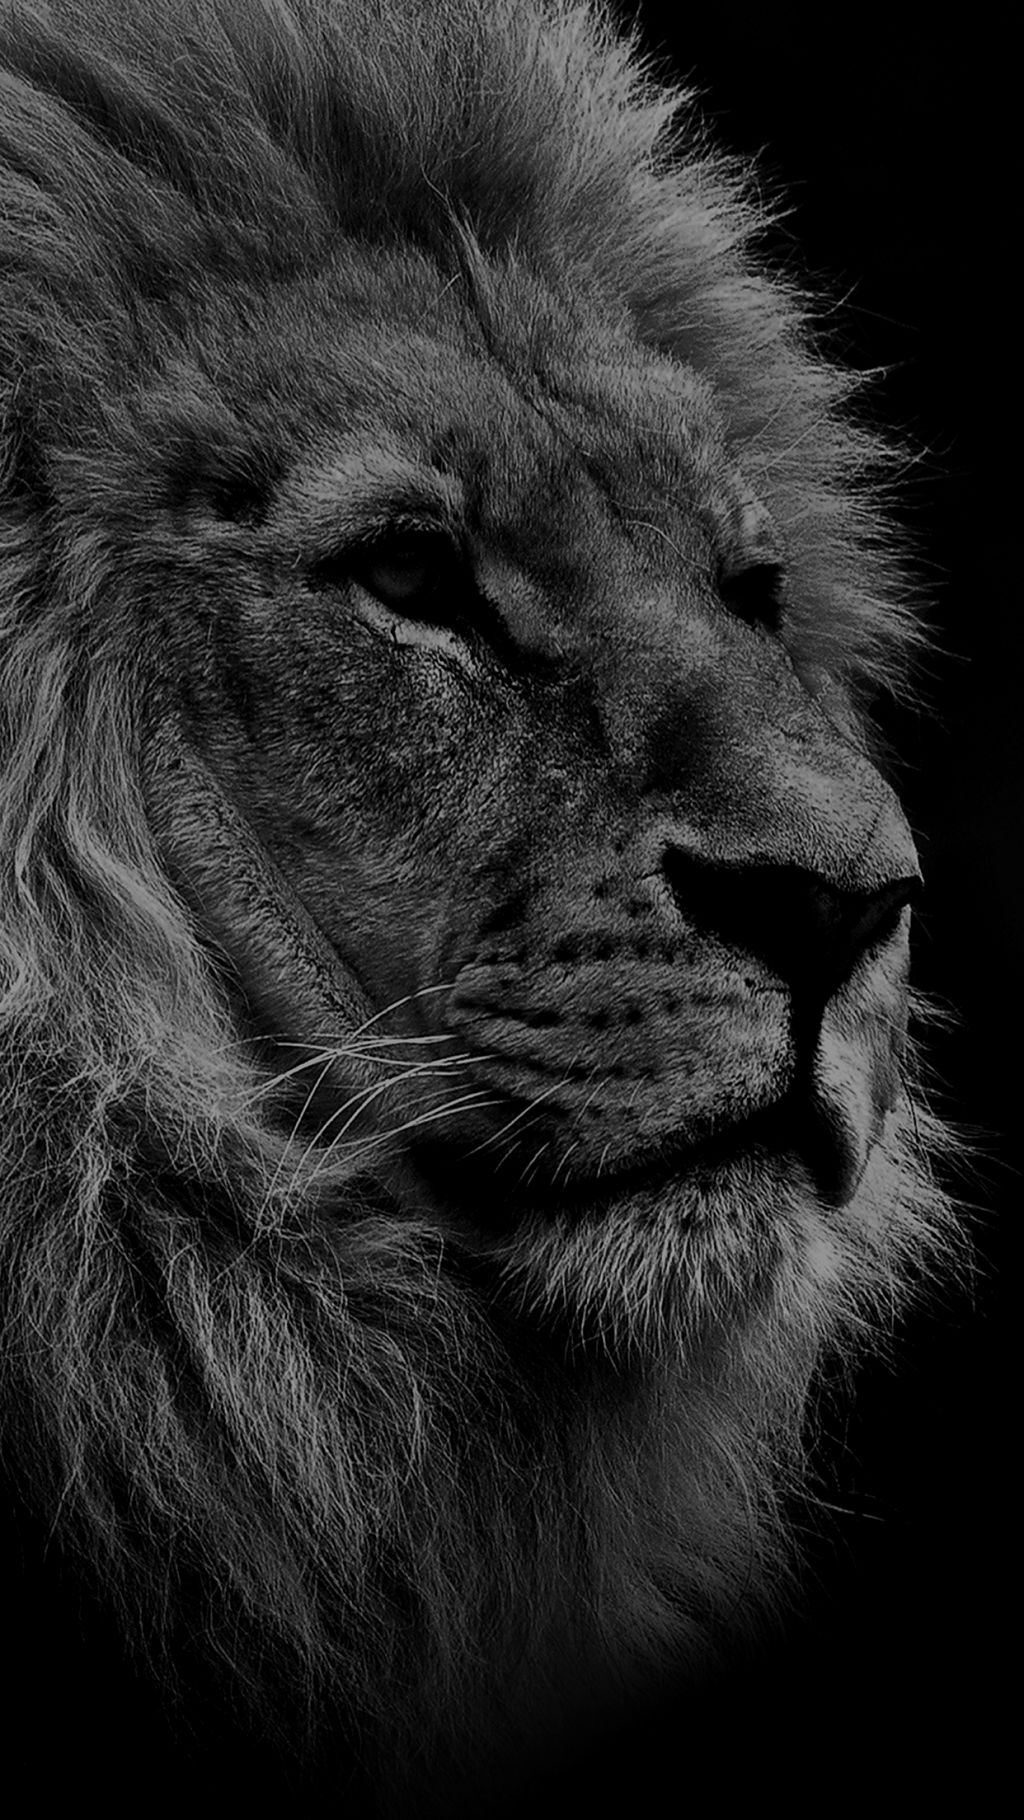 national geographic iphone wallpaper,lion,felidae,black and white,masai lion,wildlife